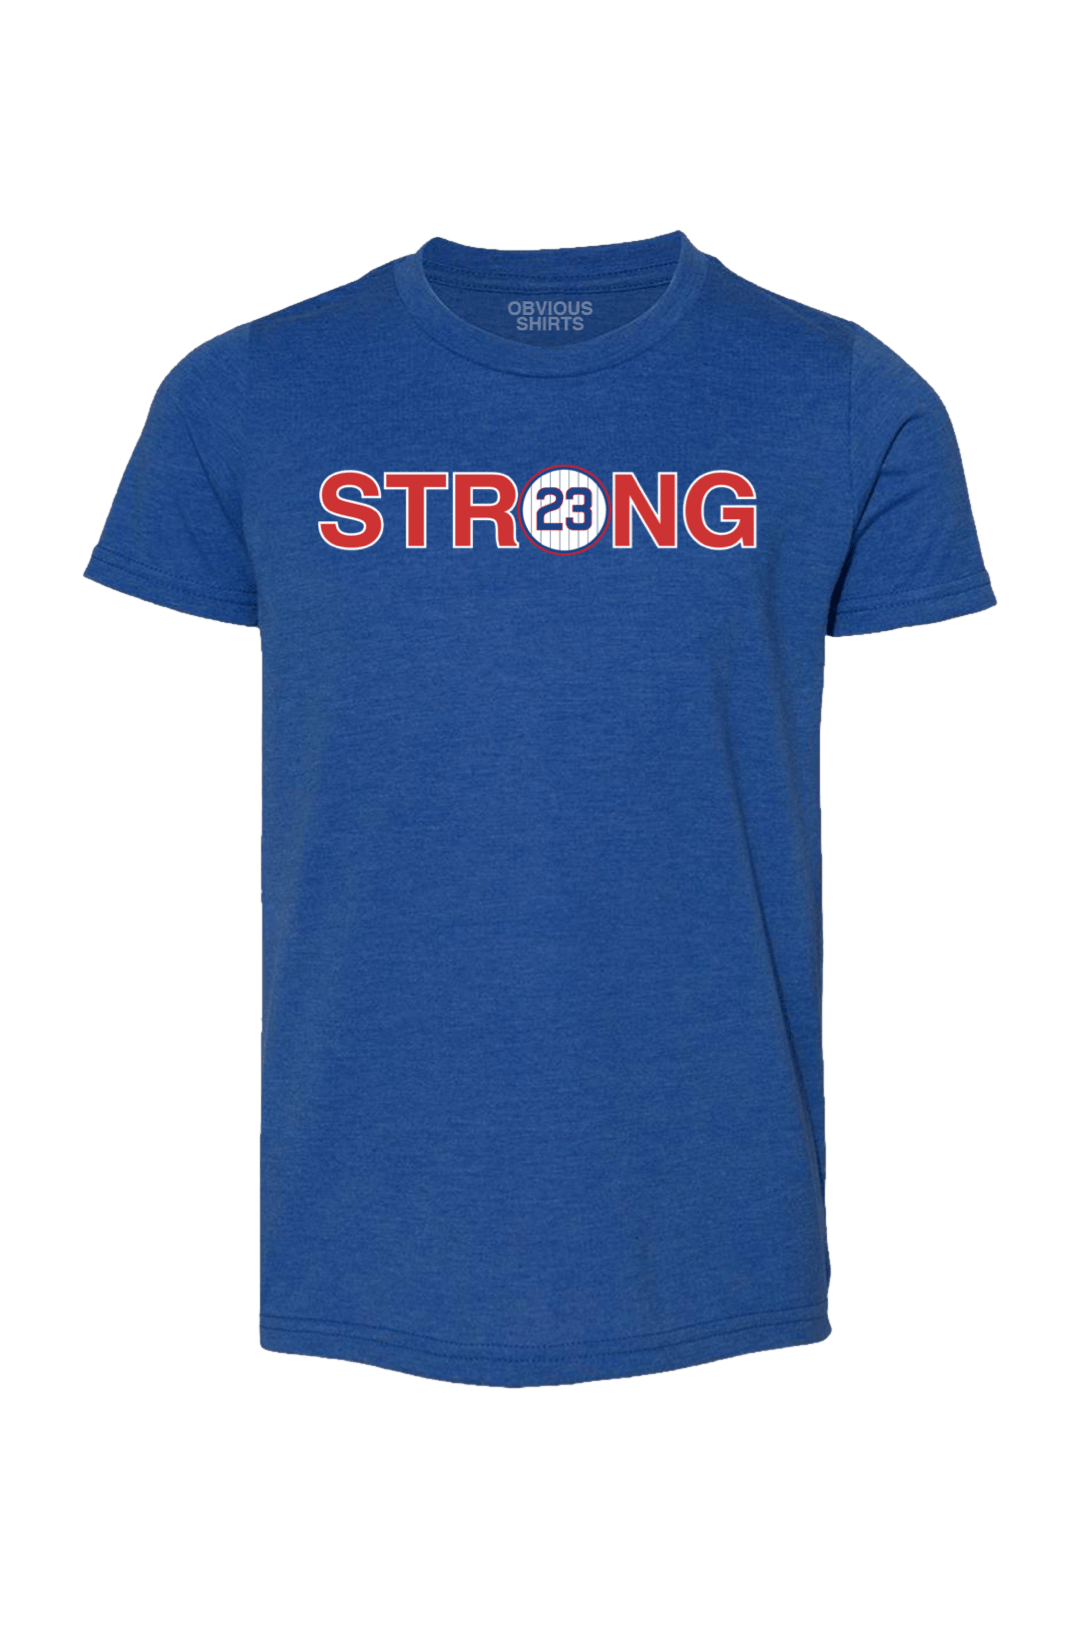 WE ARE ALL RYNO STRONG. (YOUTH) - OBVIOUS SHIRTS